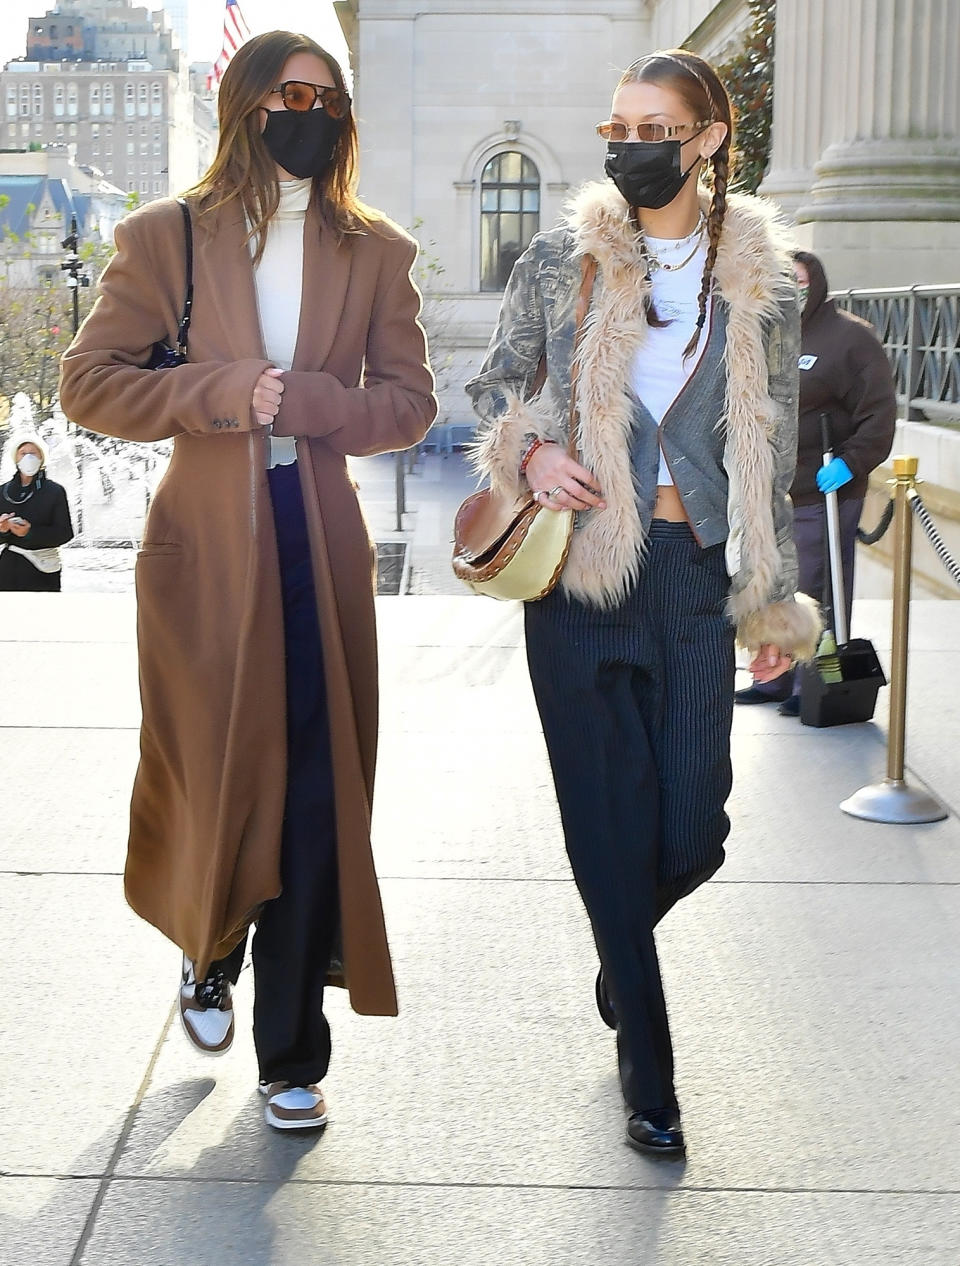 <p>Kendall Jenner and Bella Hadid leave Bubby's and head to the Metropolitan Museum of Art on Thursday in N.Y.C.</p>